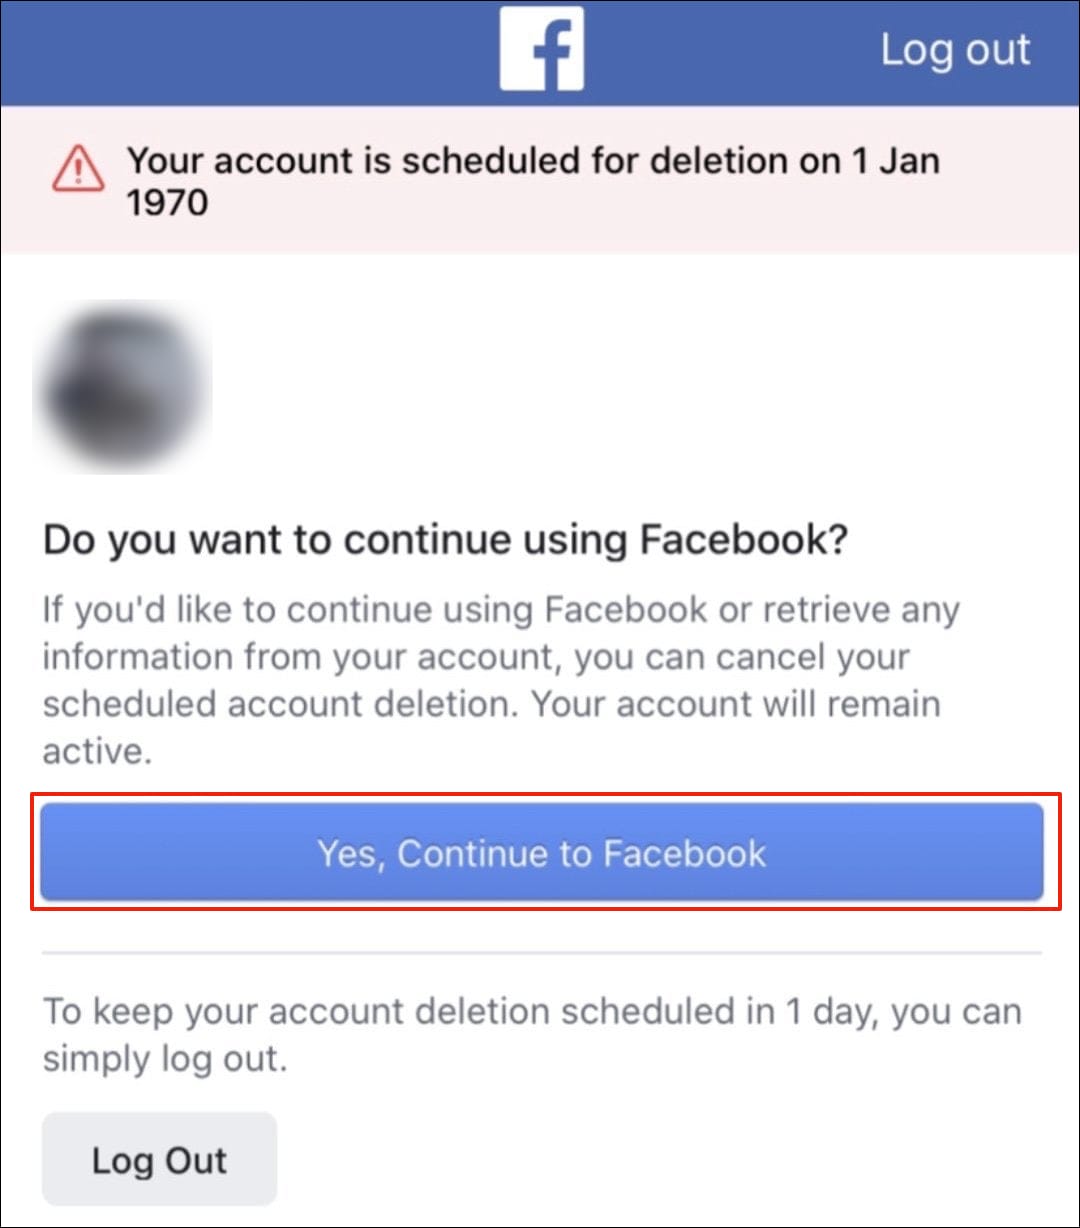 Click on the "Yes, Continue to Facebook" option